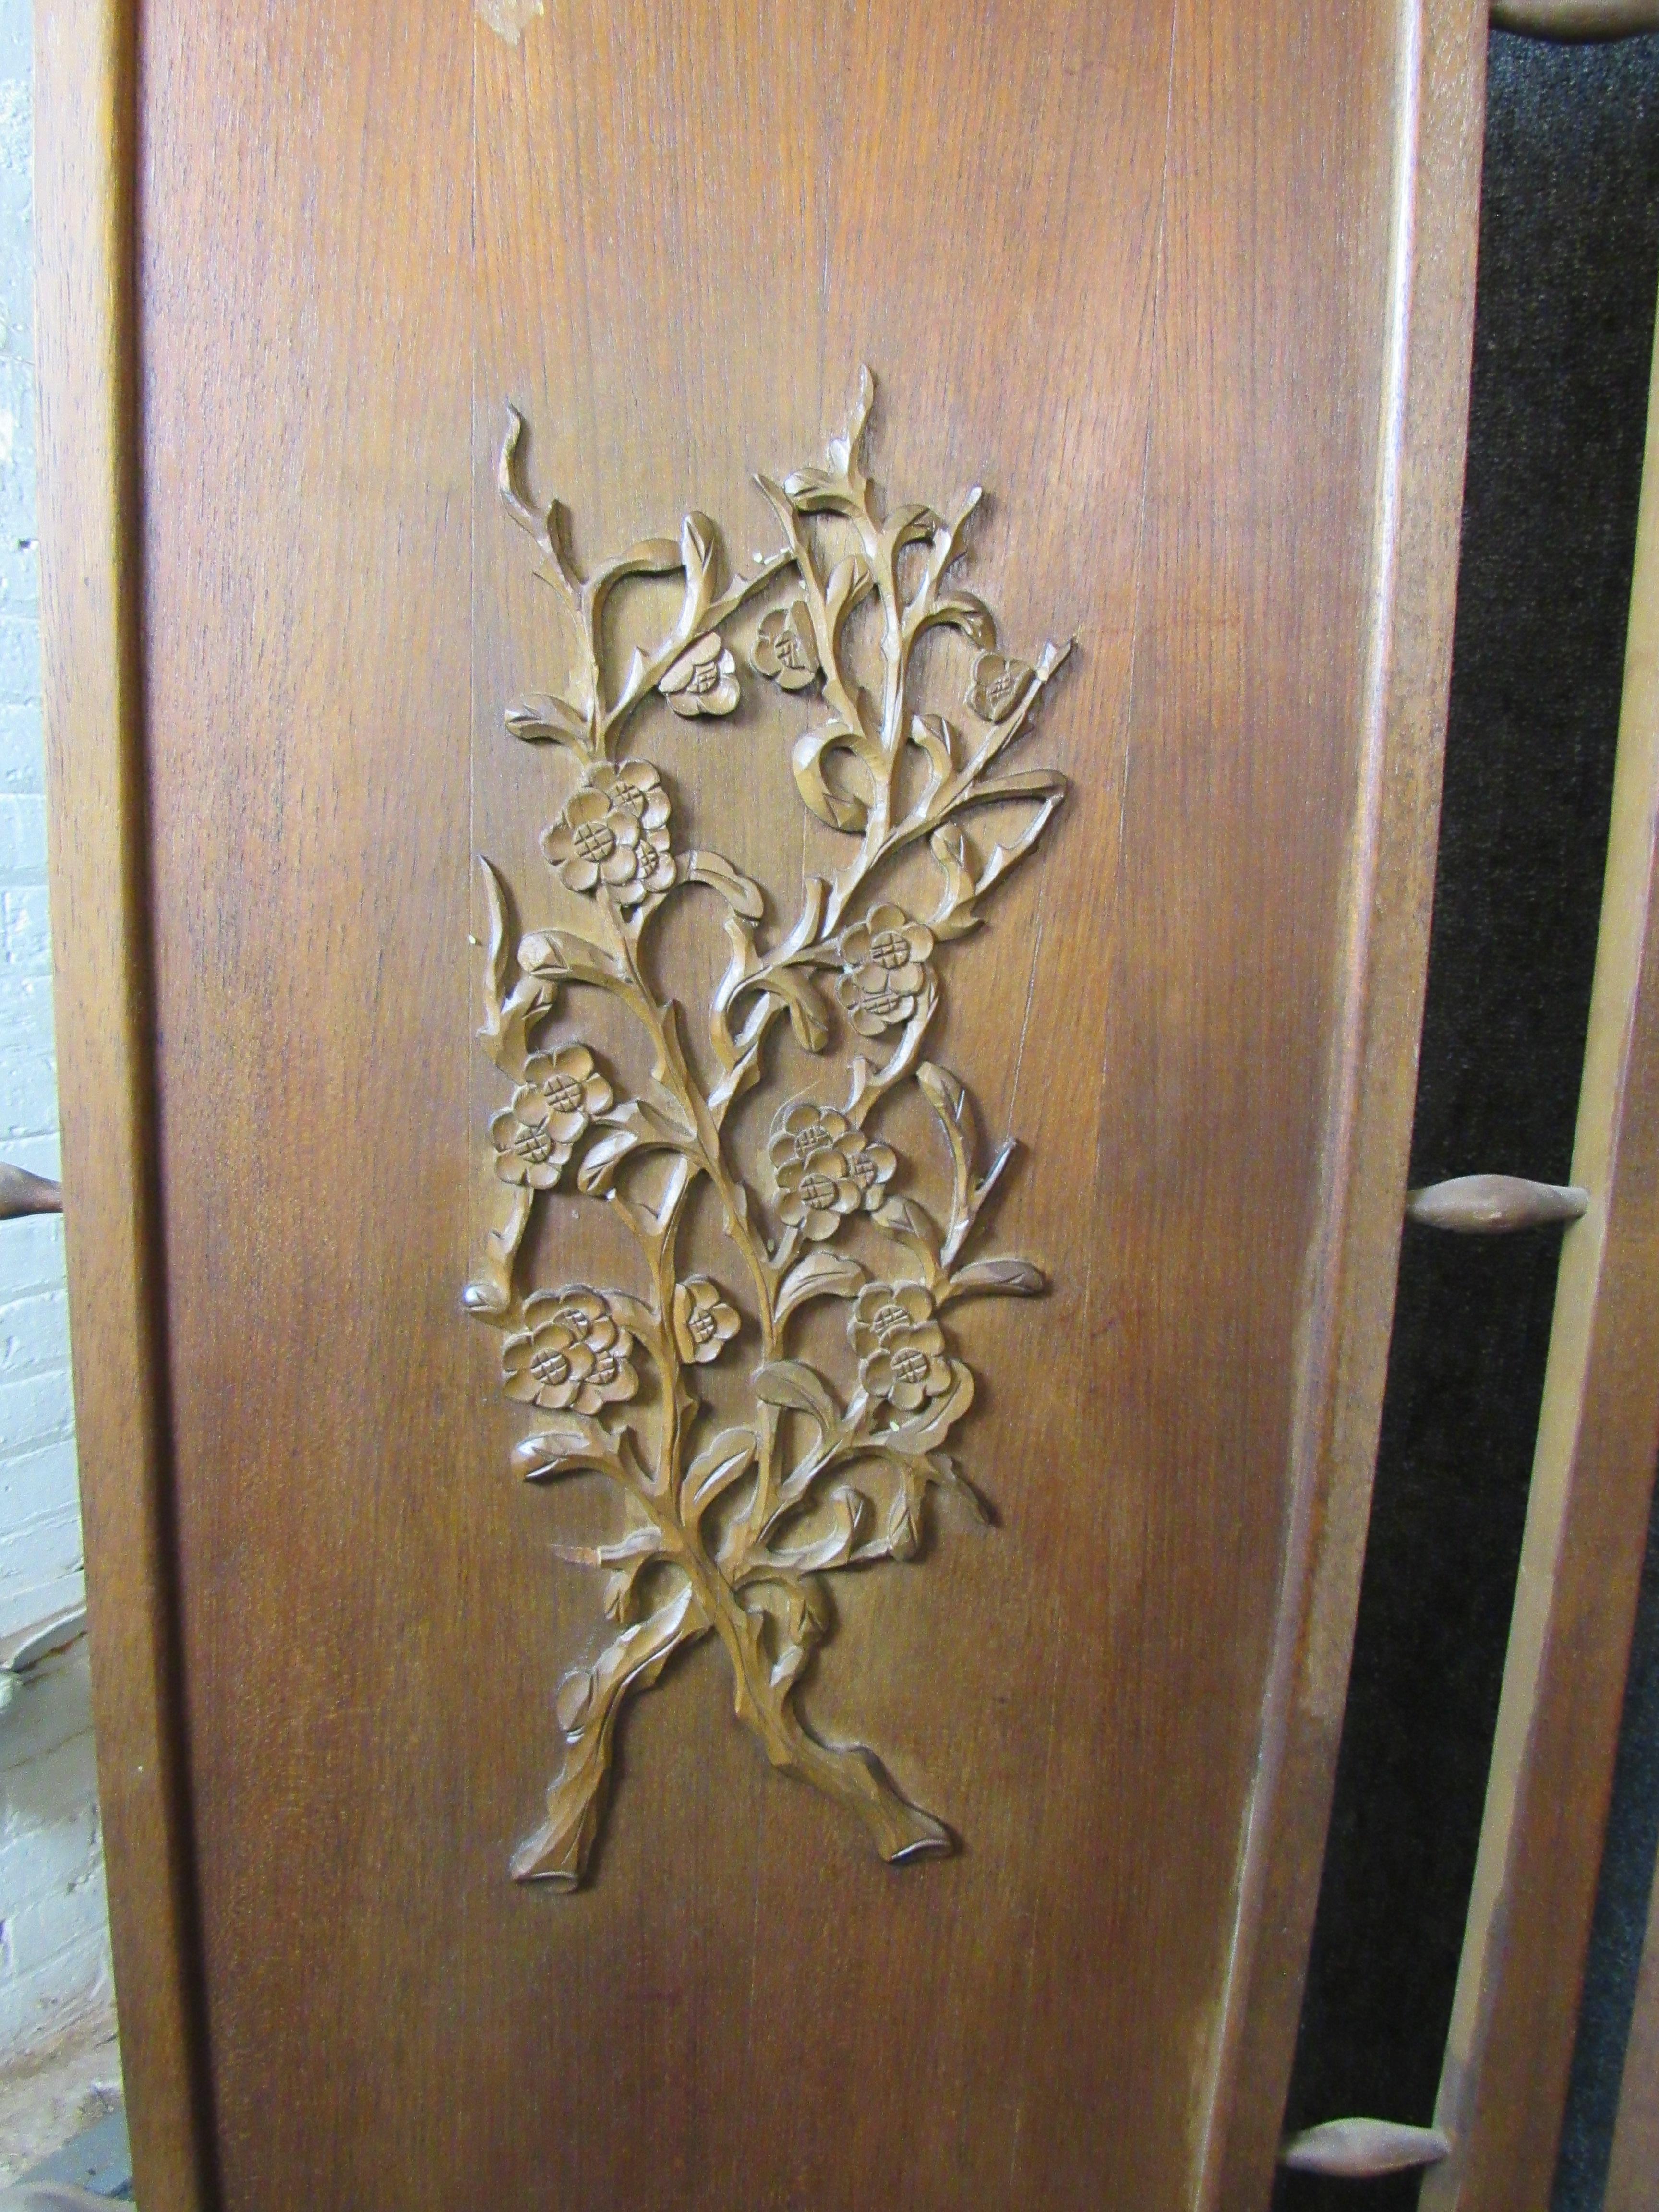 Absolutely stunning walnut room divider featuring gorgeous hand carved floral motifs on each section. Sure to make a statement in any room of the home or office. Folds to a convenient 24